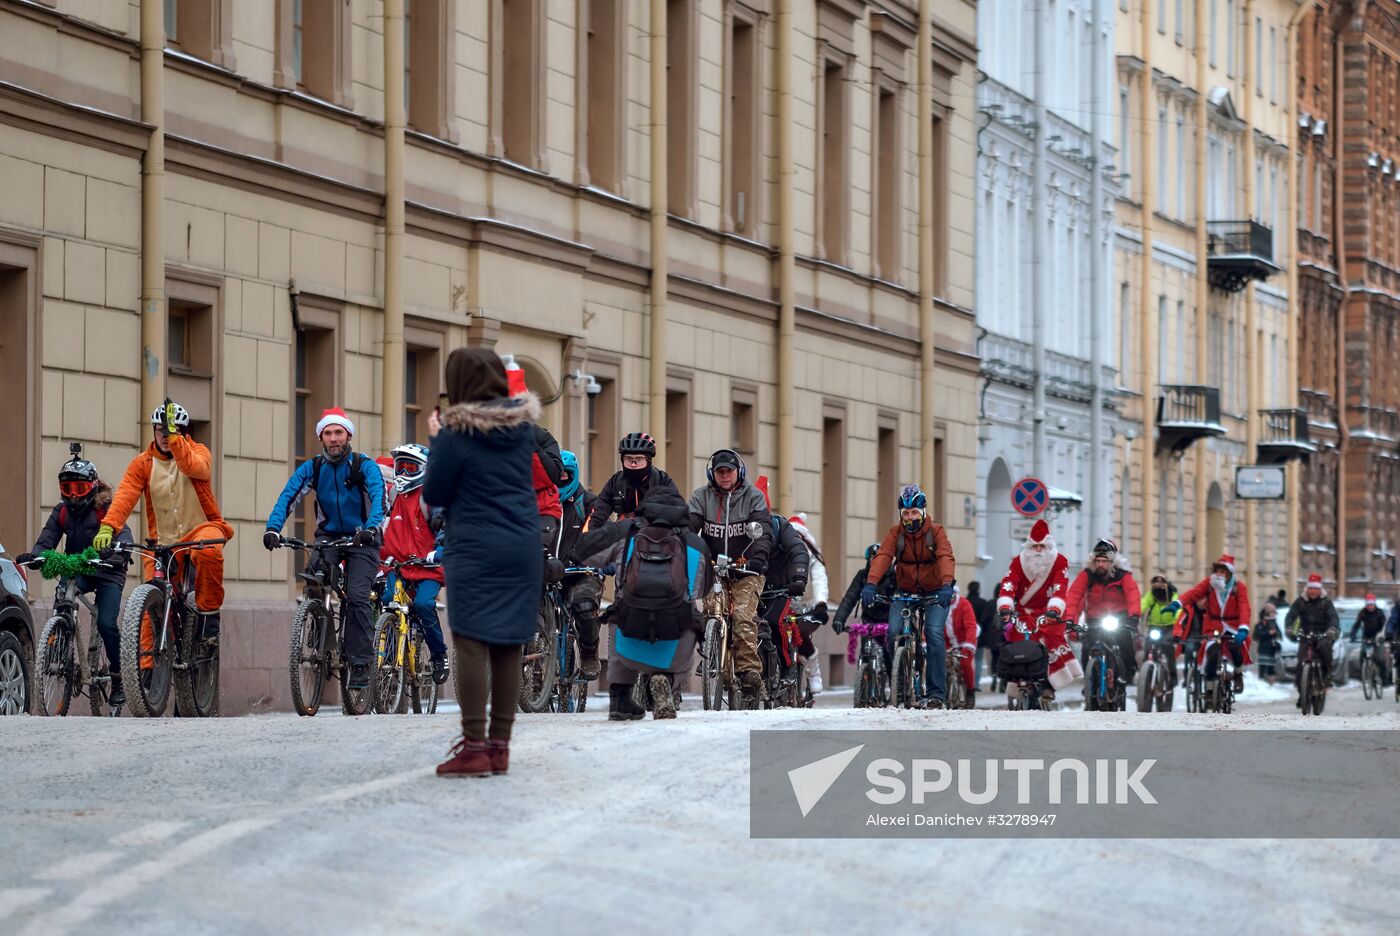 Father Frost bike parade in St. Petersburg